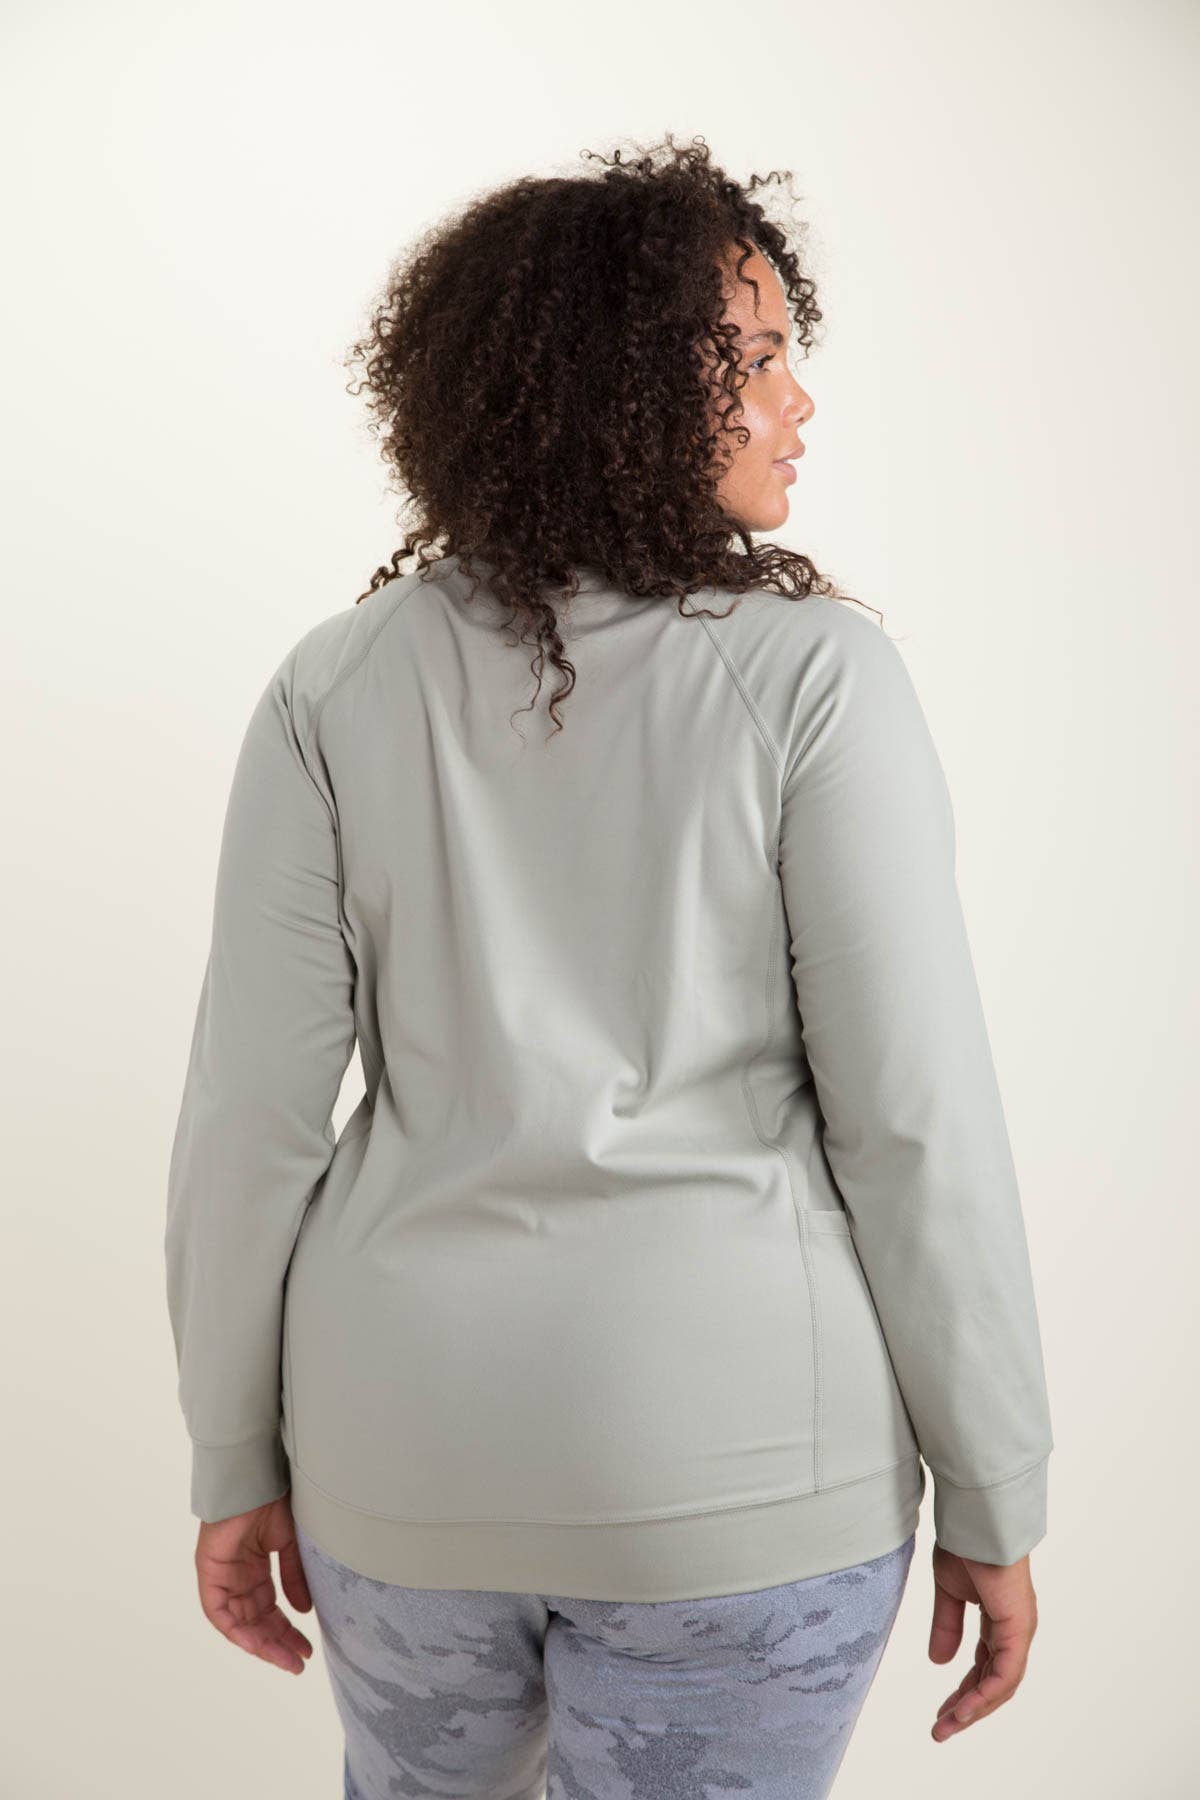 Mono B Pullover Top with Side Pockets (Regular & Plus Sizes